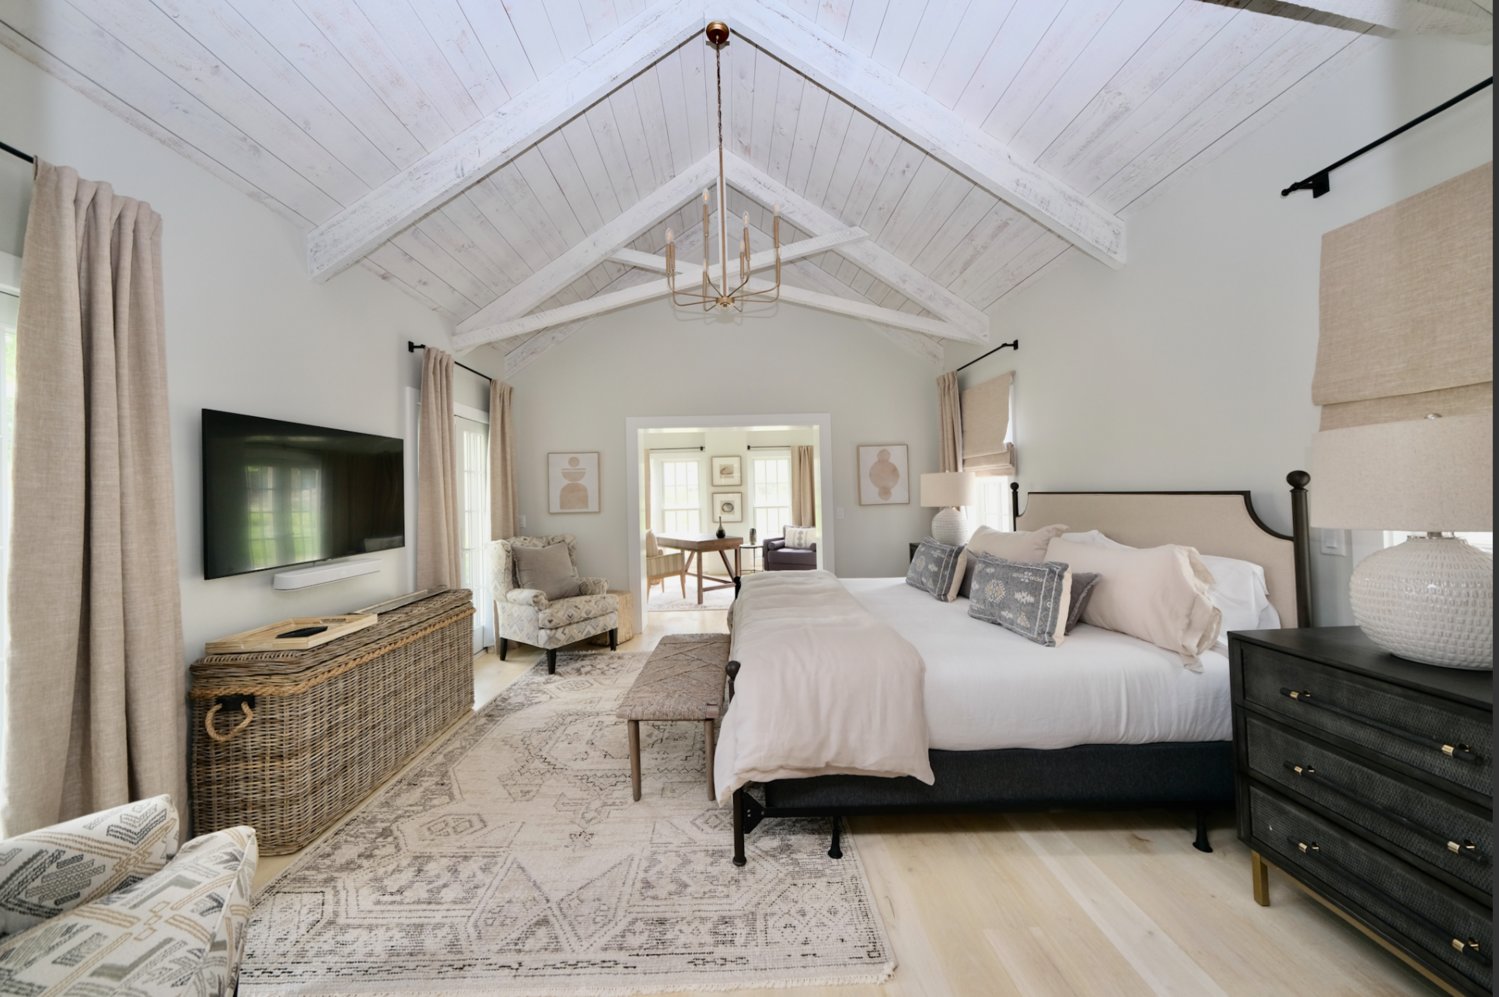 This bedroom suite has exposed beams and a sitting room.